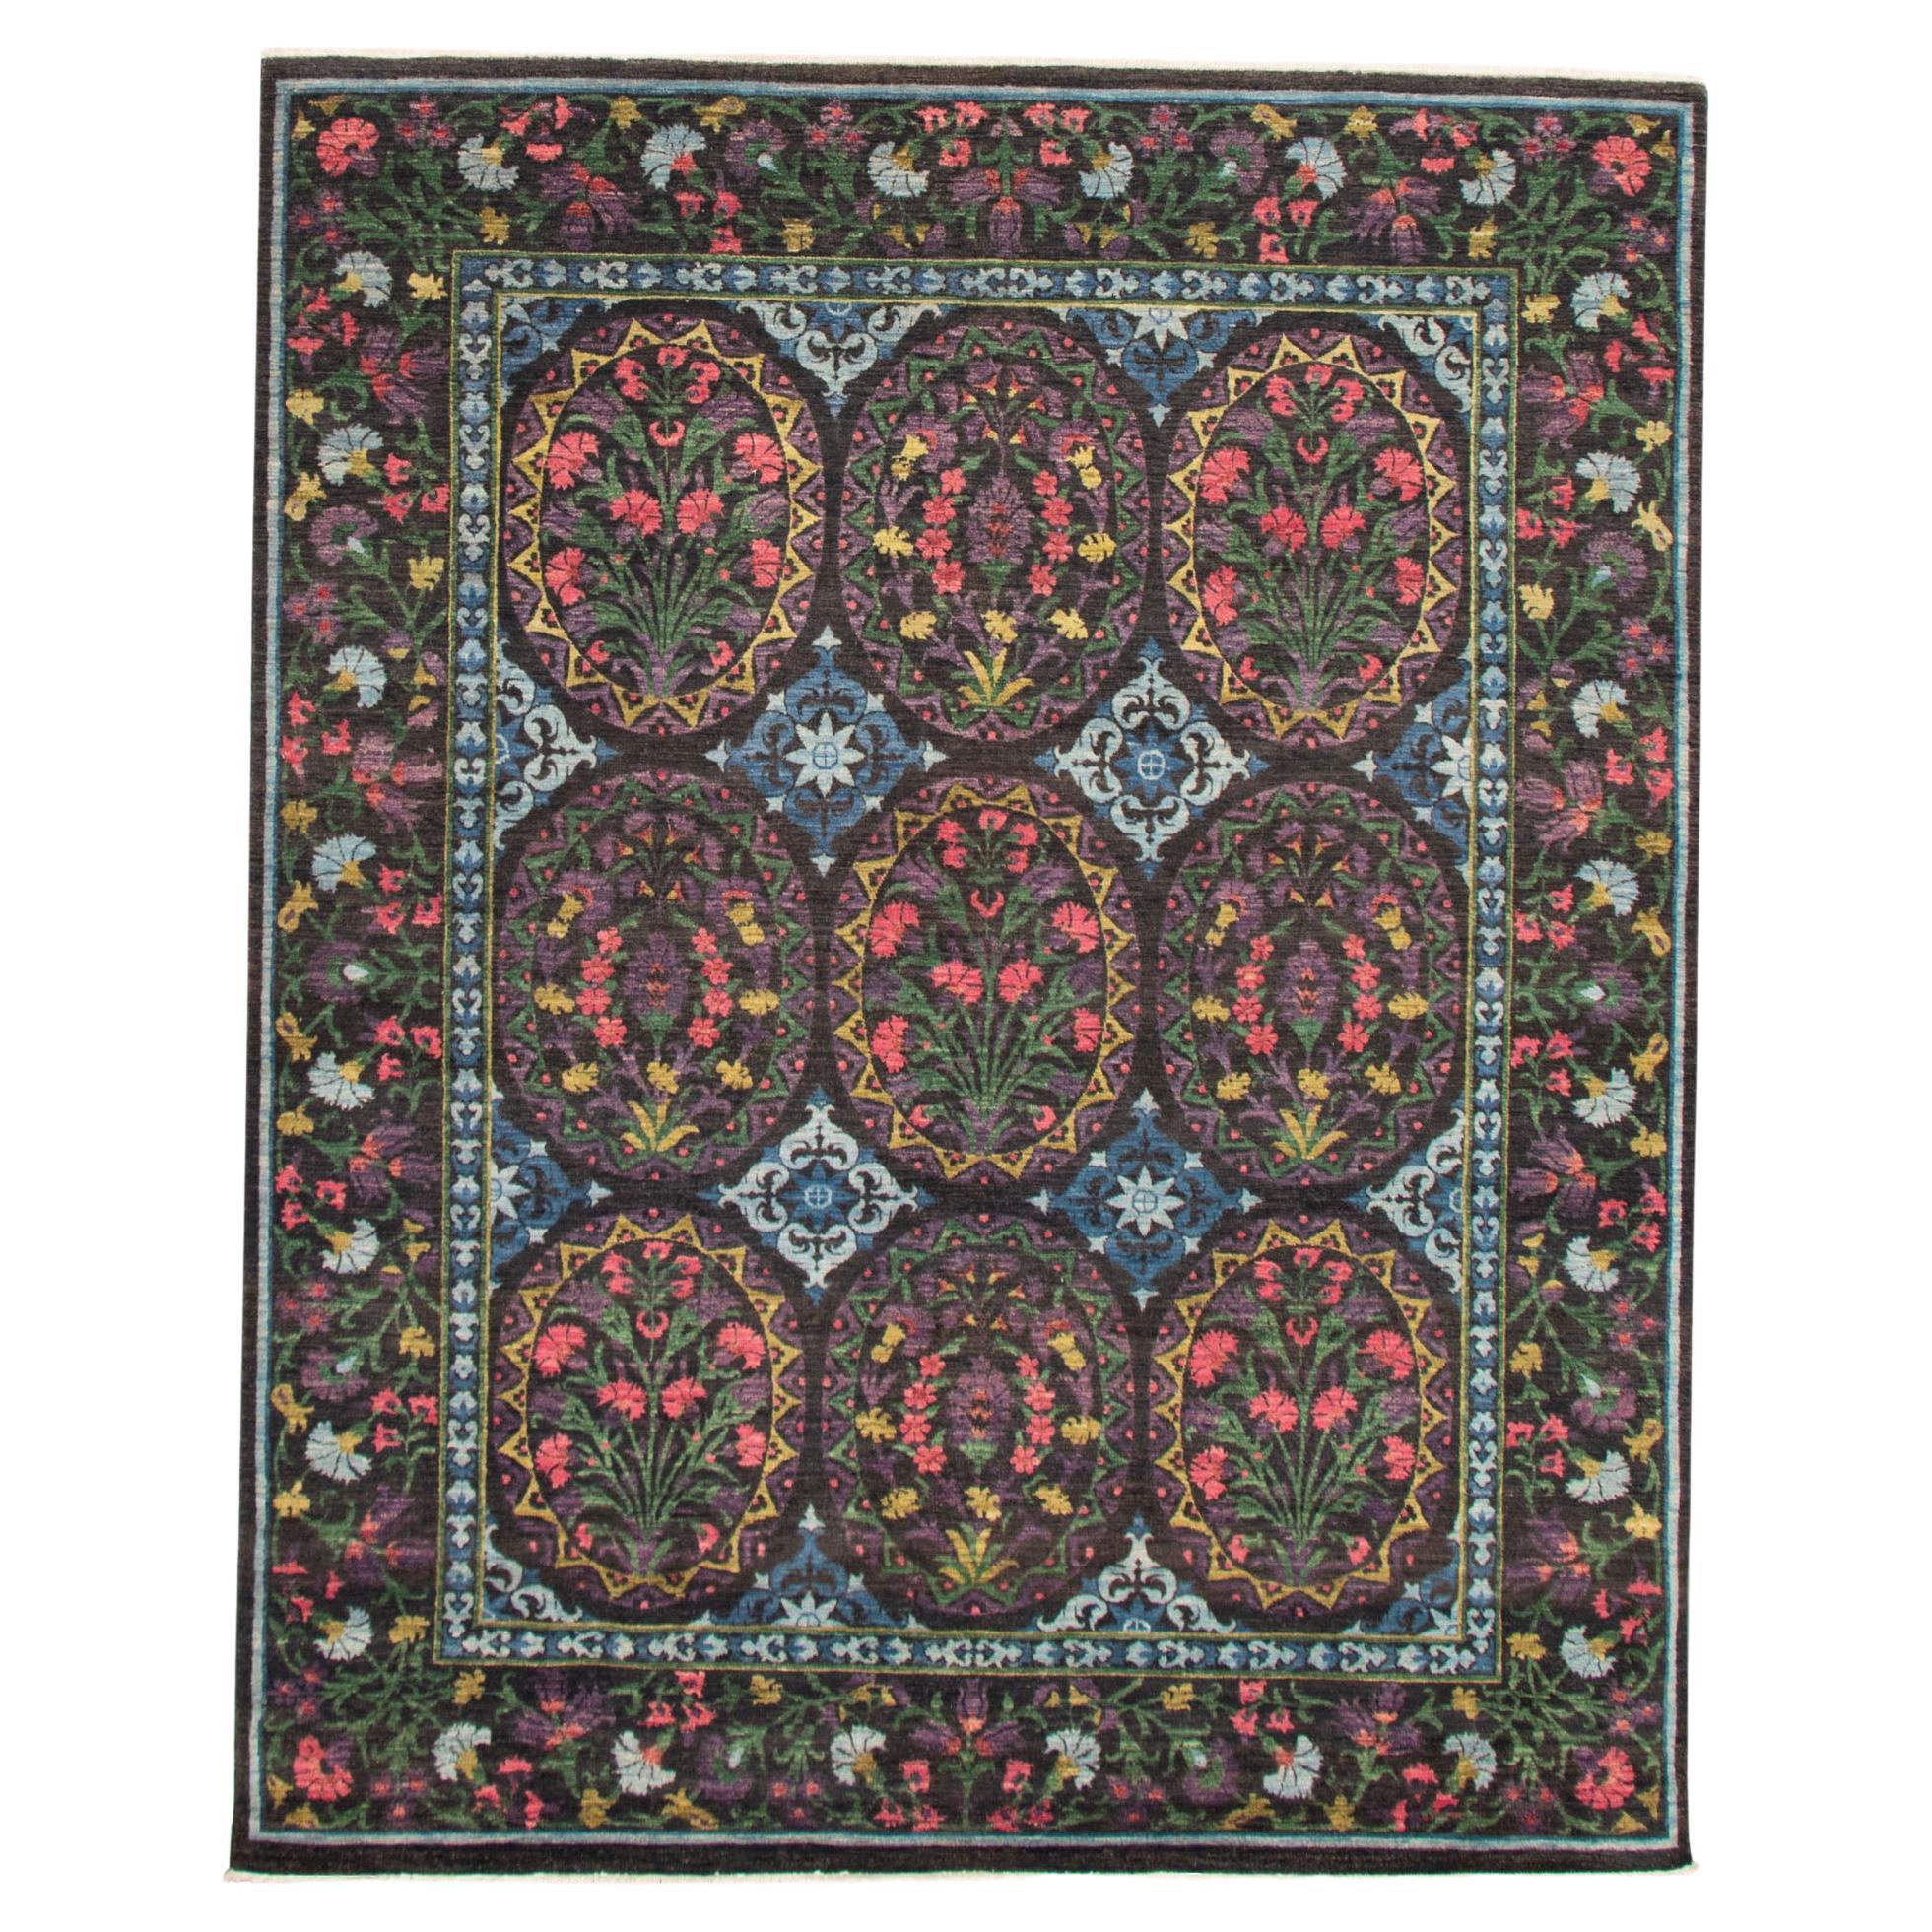 Transitional Hand-knotted Wool Lahore Carpet with Floral Design, 8' x 10'